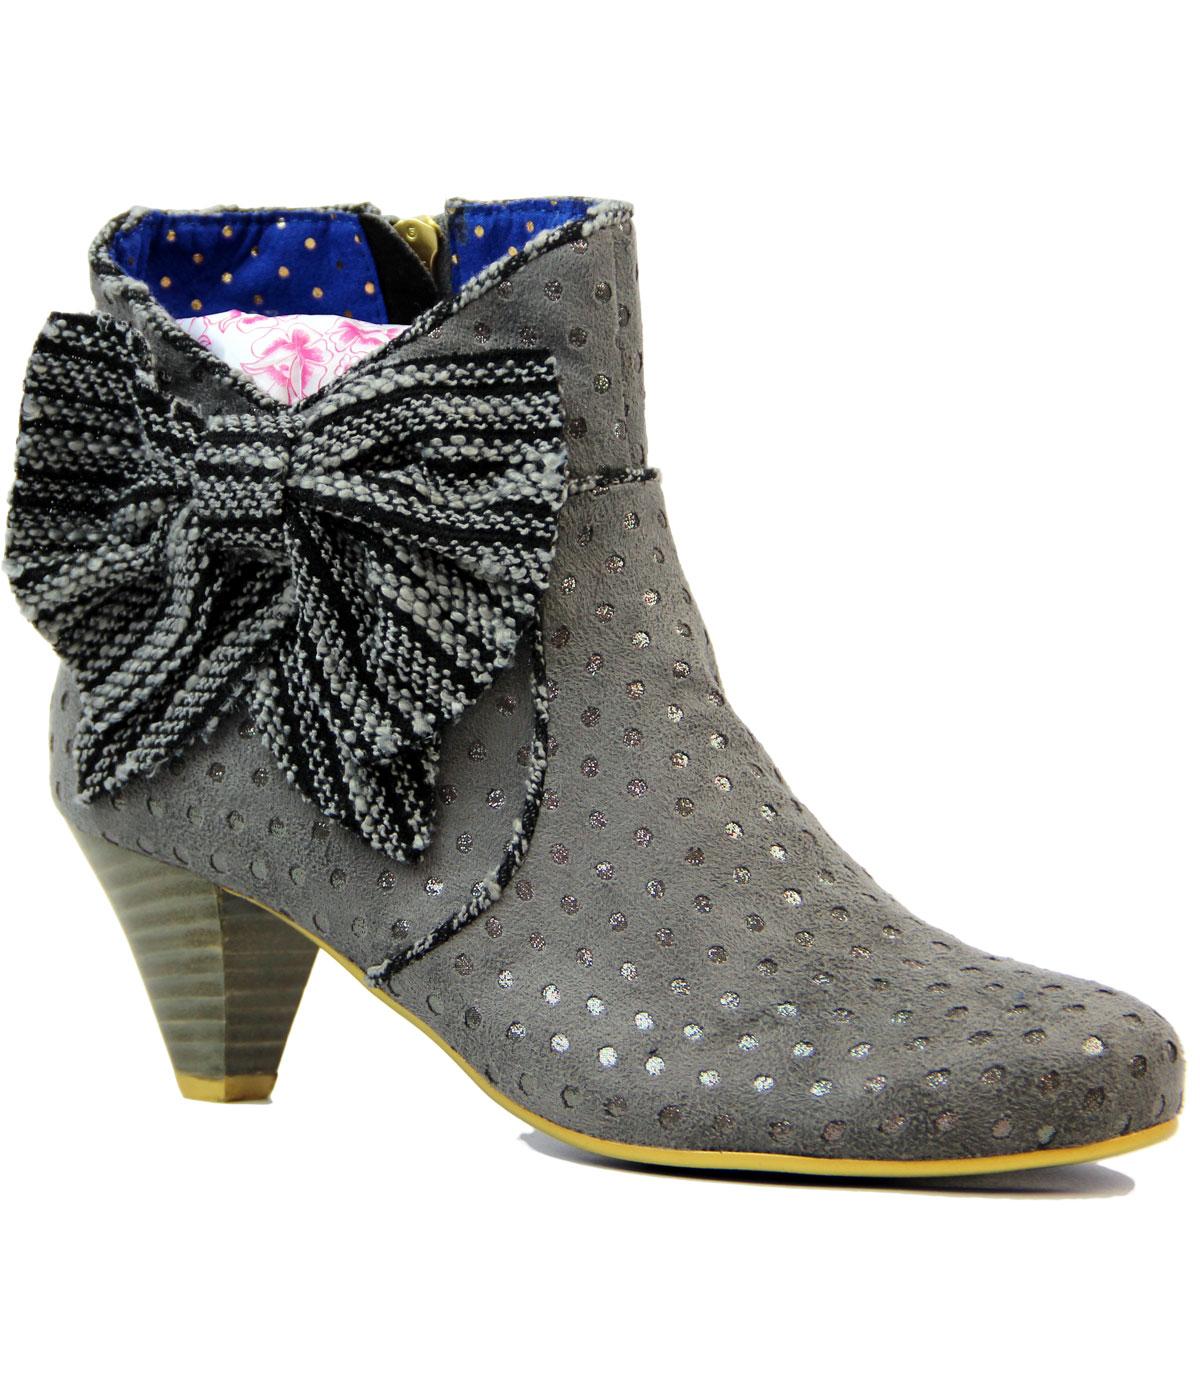 Bow Beauty POETIC LICENCE Retro Vintage Boots